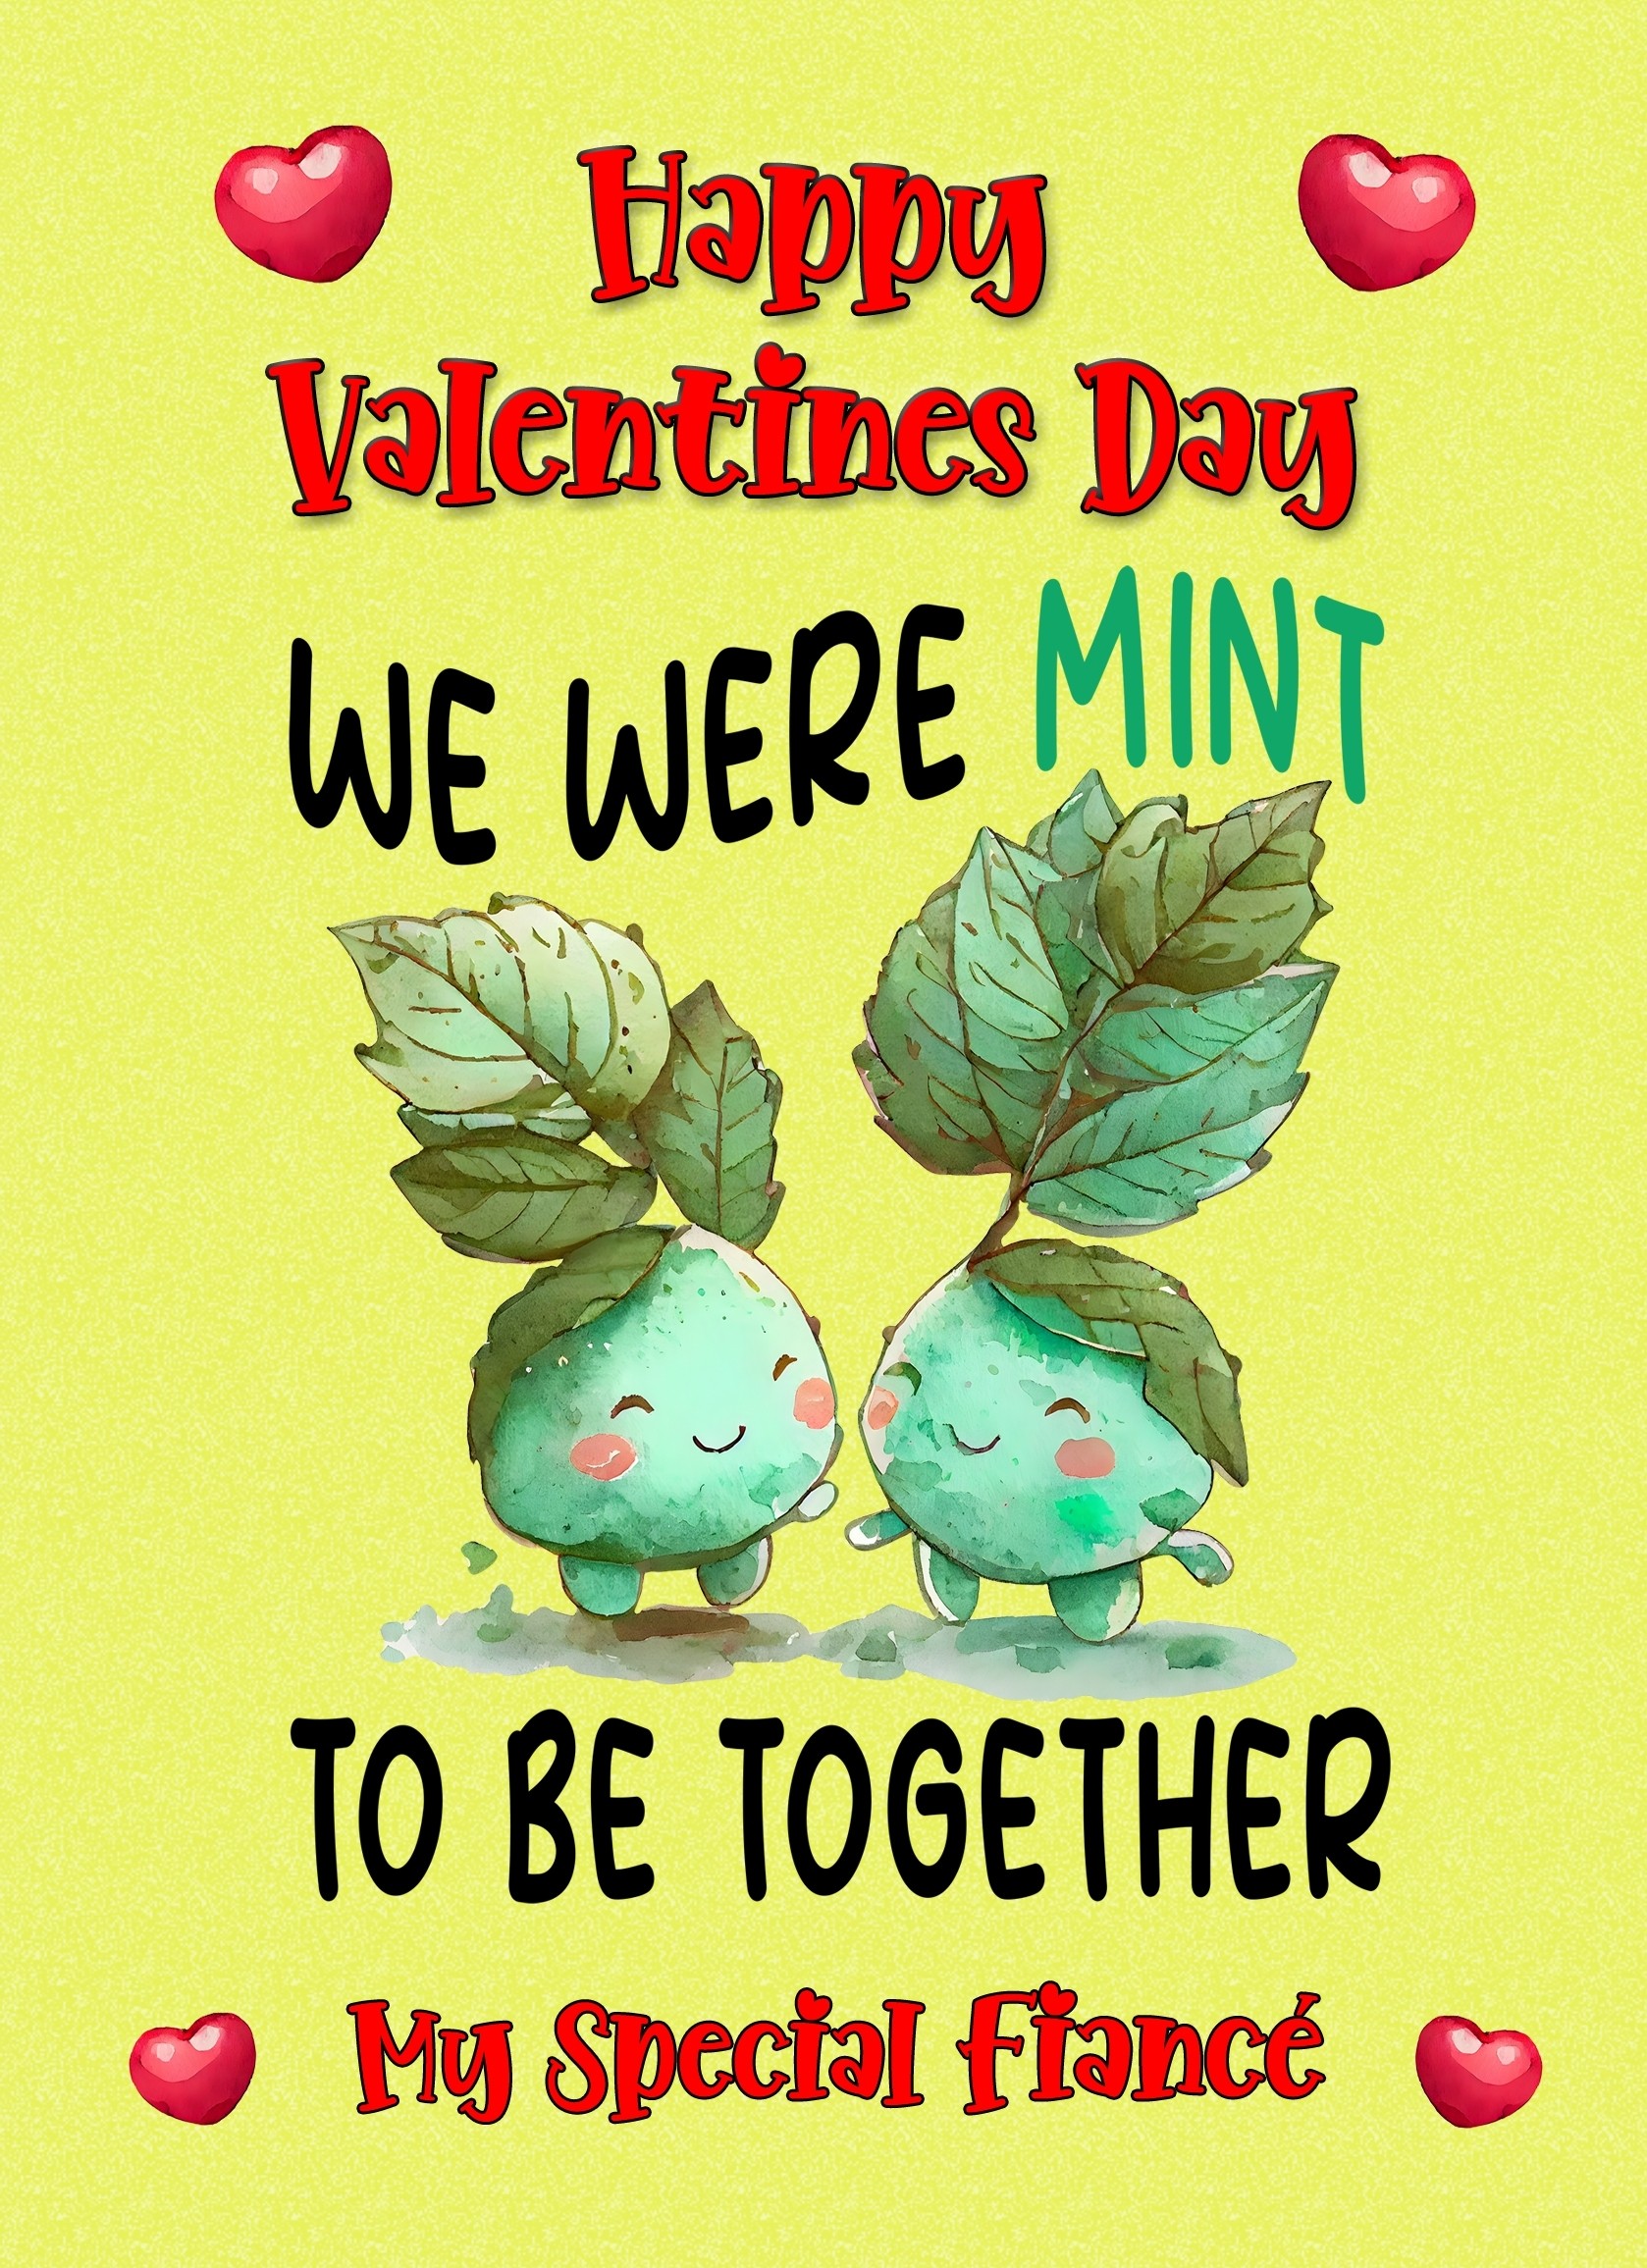 Funny Pun Valentines Day Card for Fiance (Mint to Be)